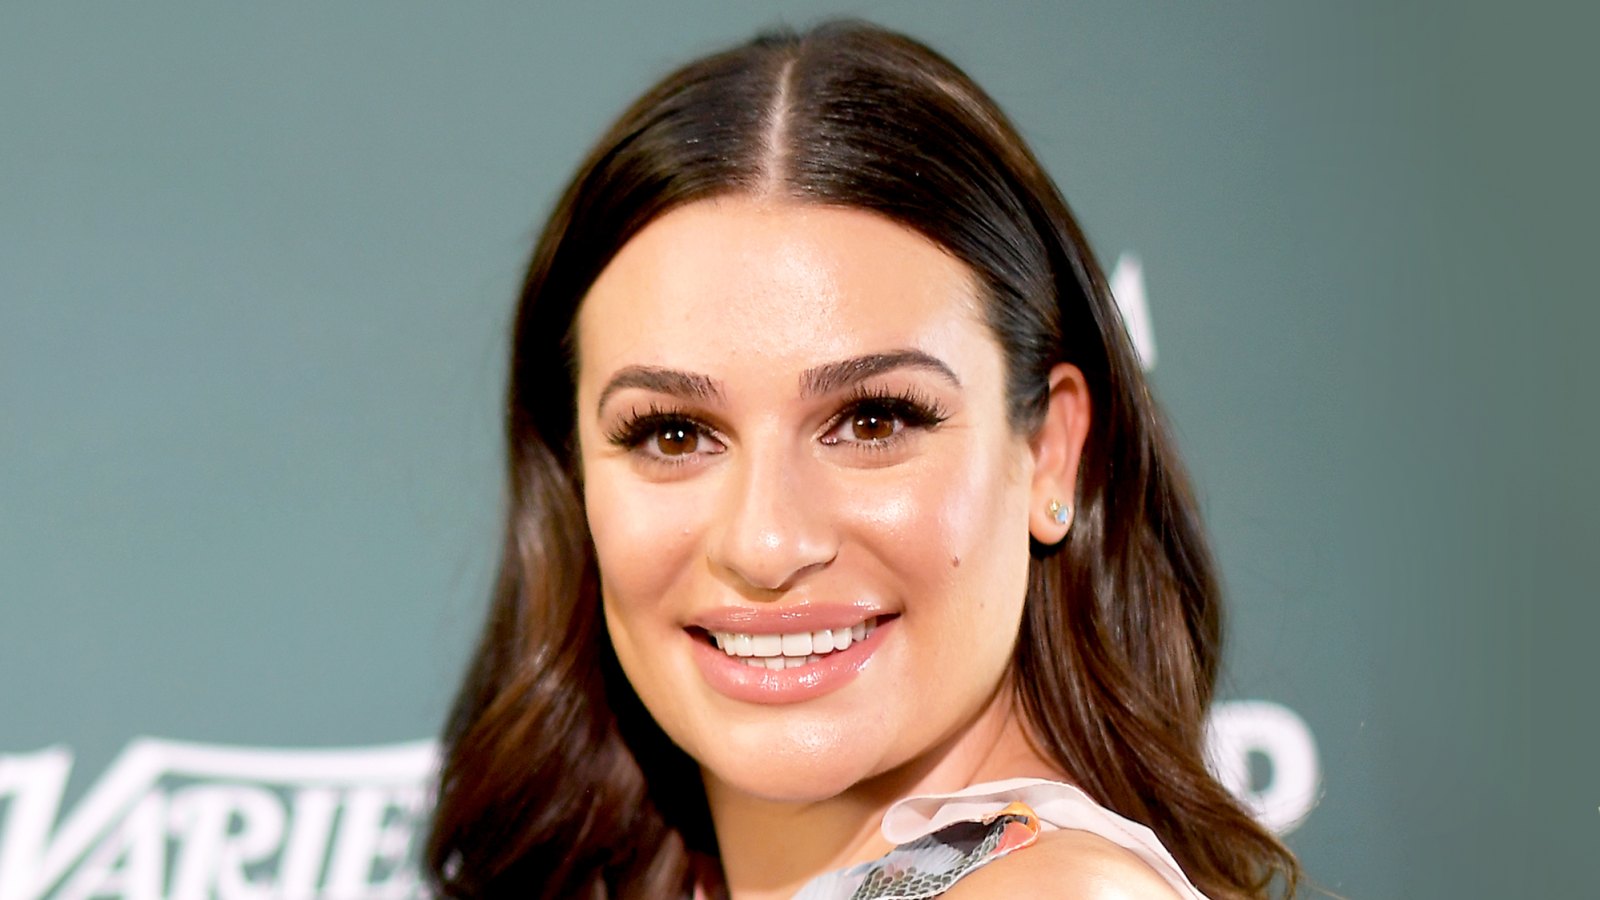 Lea Michele attends the 2018 Runway To Red Carpet hosted by Council of Fashion Designers of America, Variety and WWD at Chateau Marmont in Los Angeles, California.